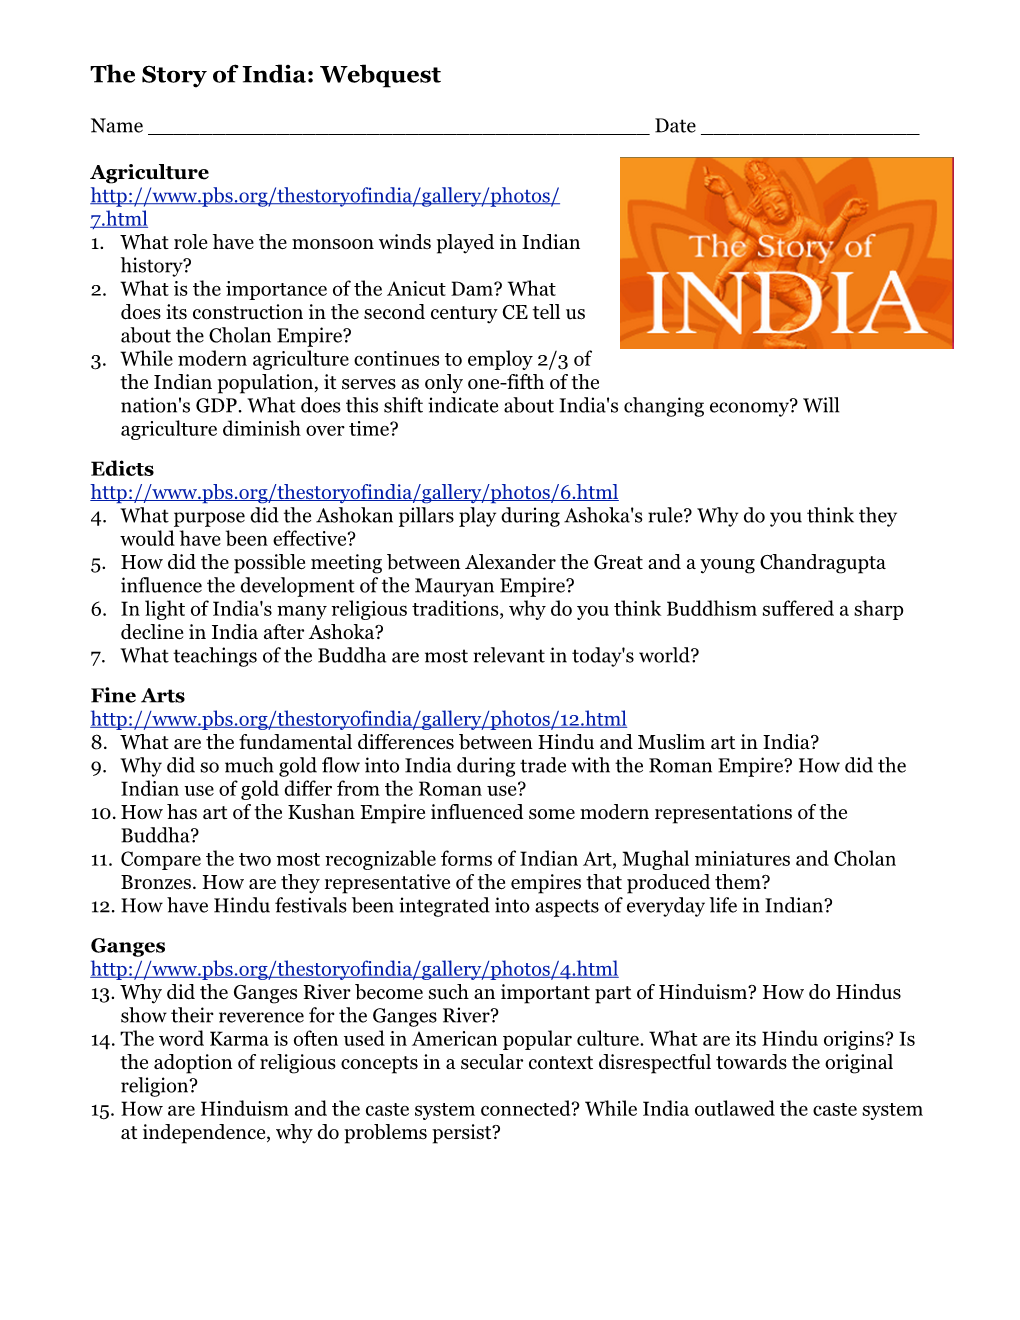 The Story of India Webquest